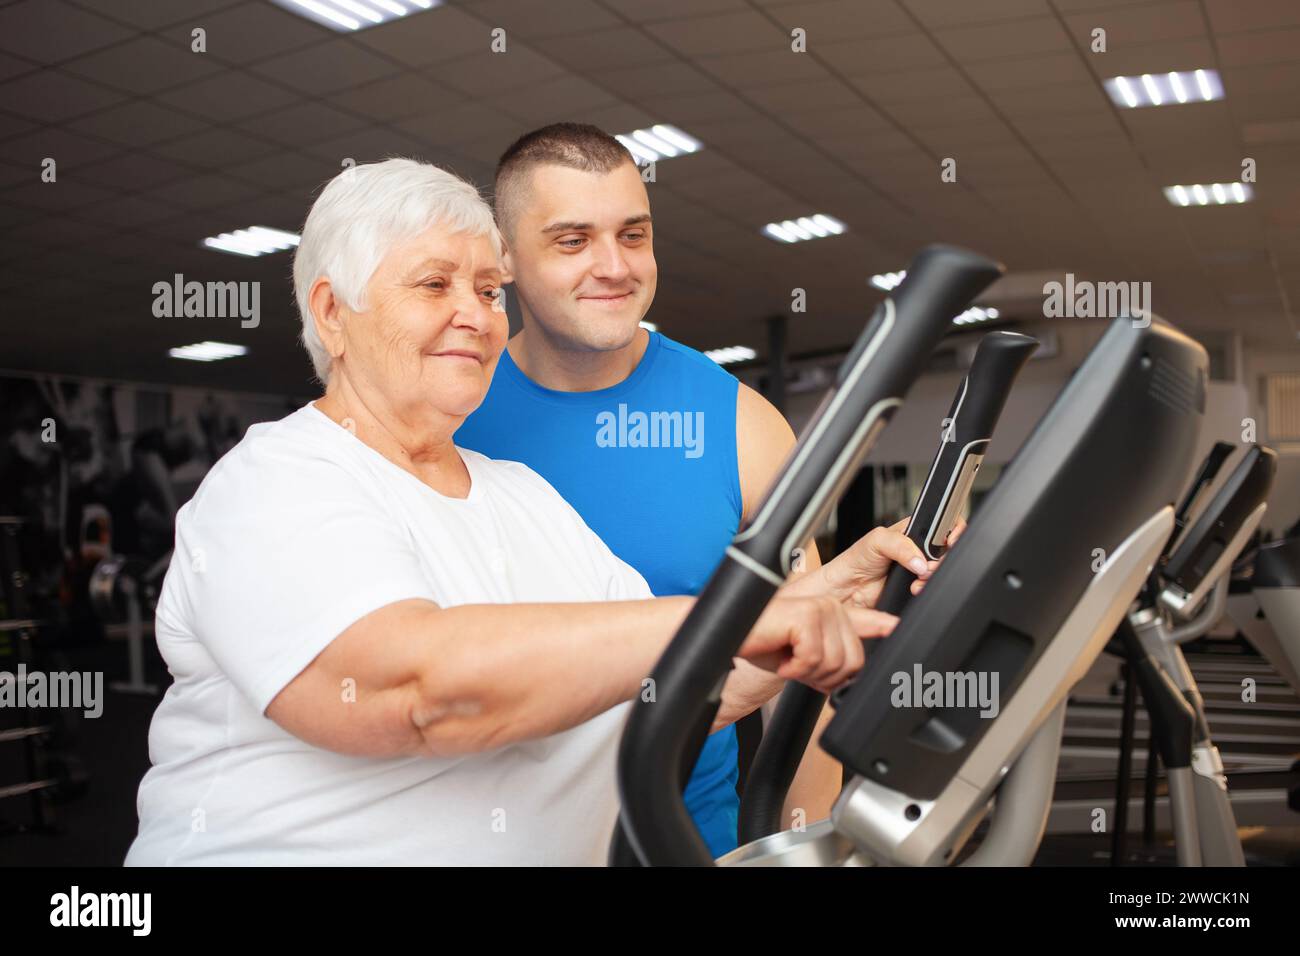 A coach and an elderly woman with gray hair in the gym. Exercise, weight loss, happy faces. Stock Photo